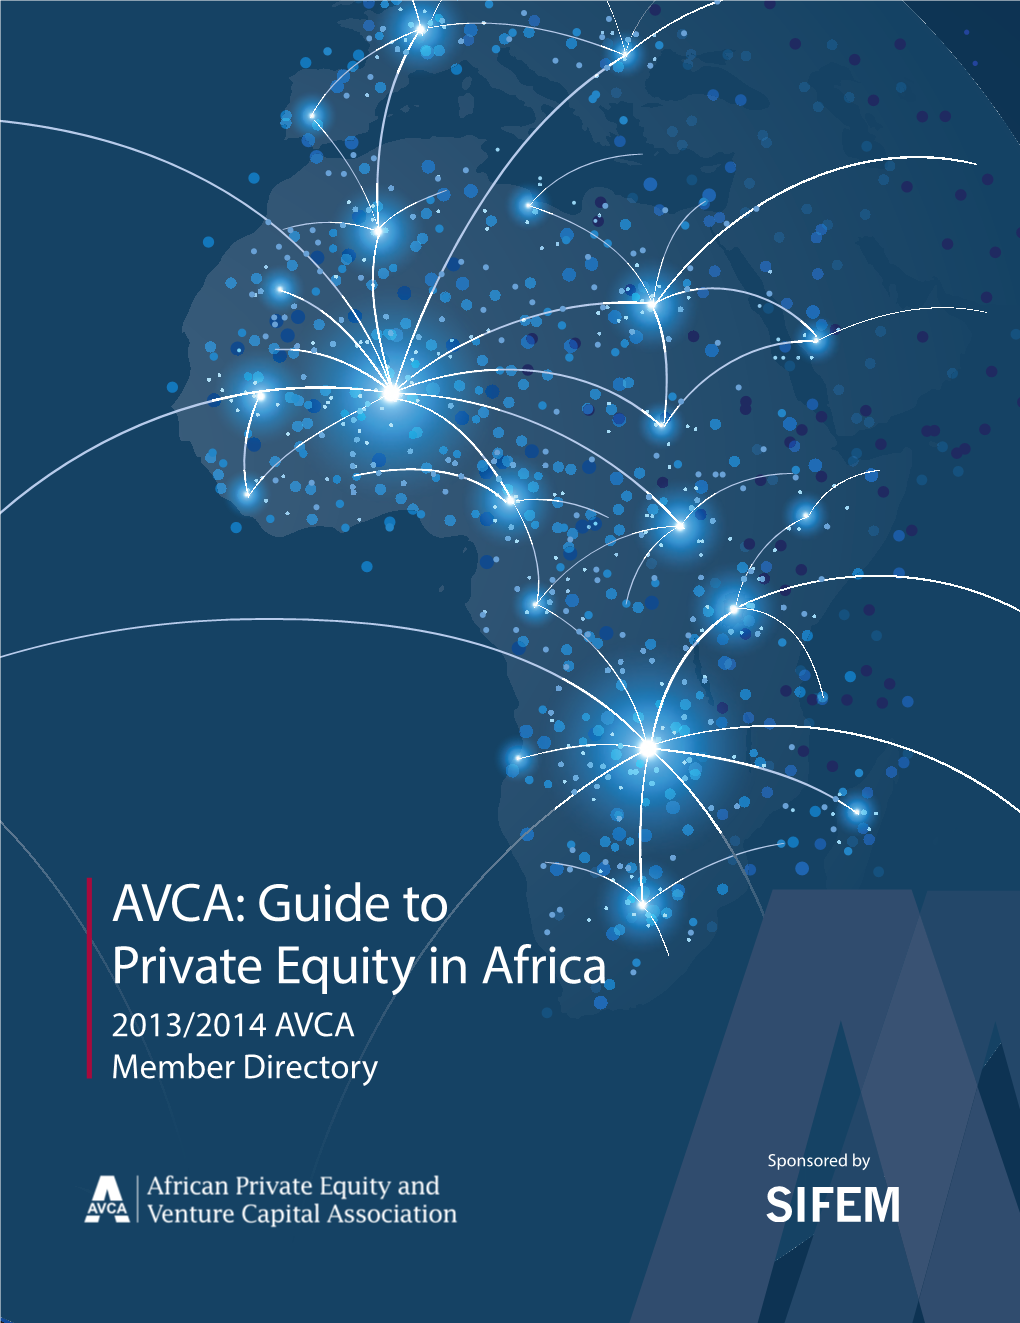 AVCA: Guide to Private Equity in Africa 2013/2014 AVCA Member Directory